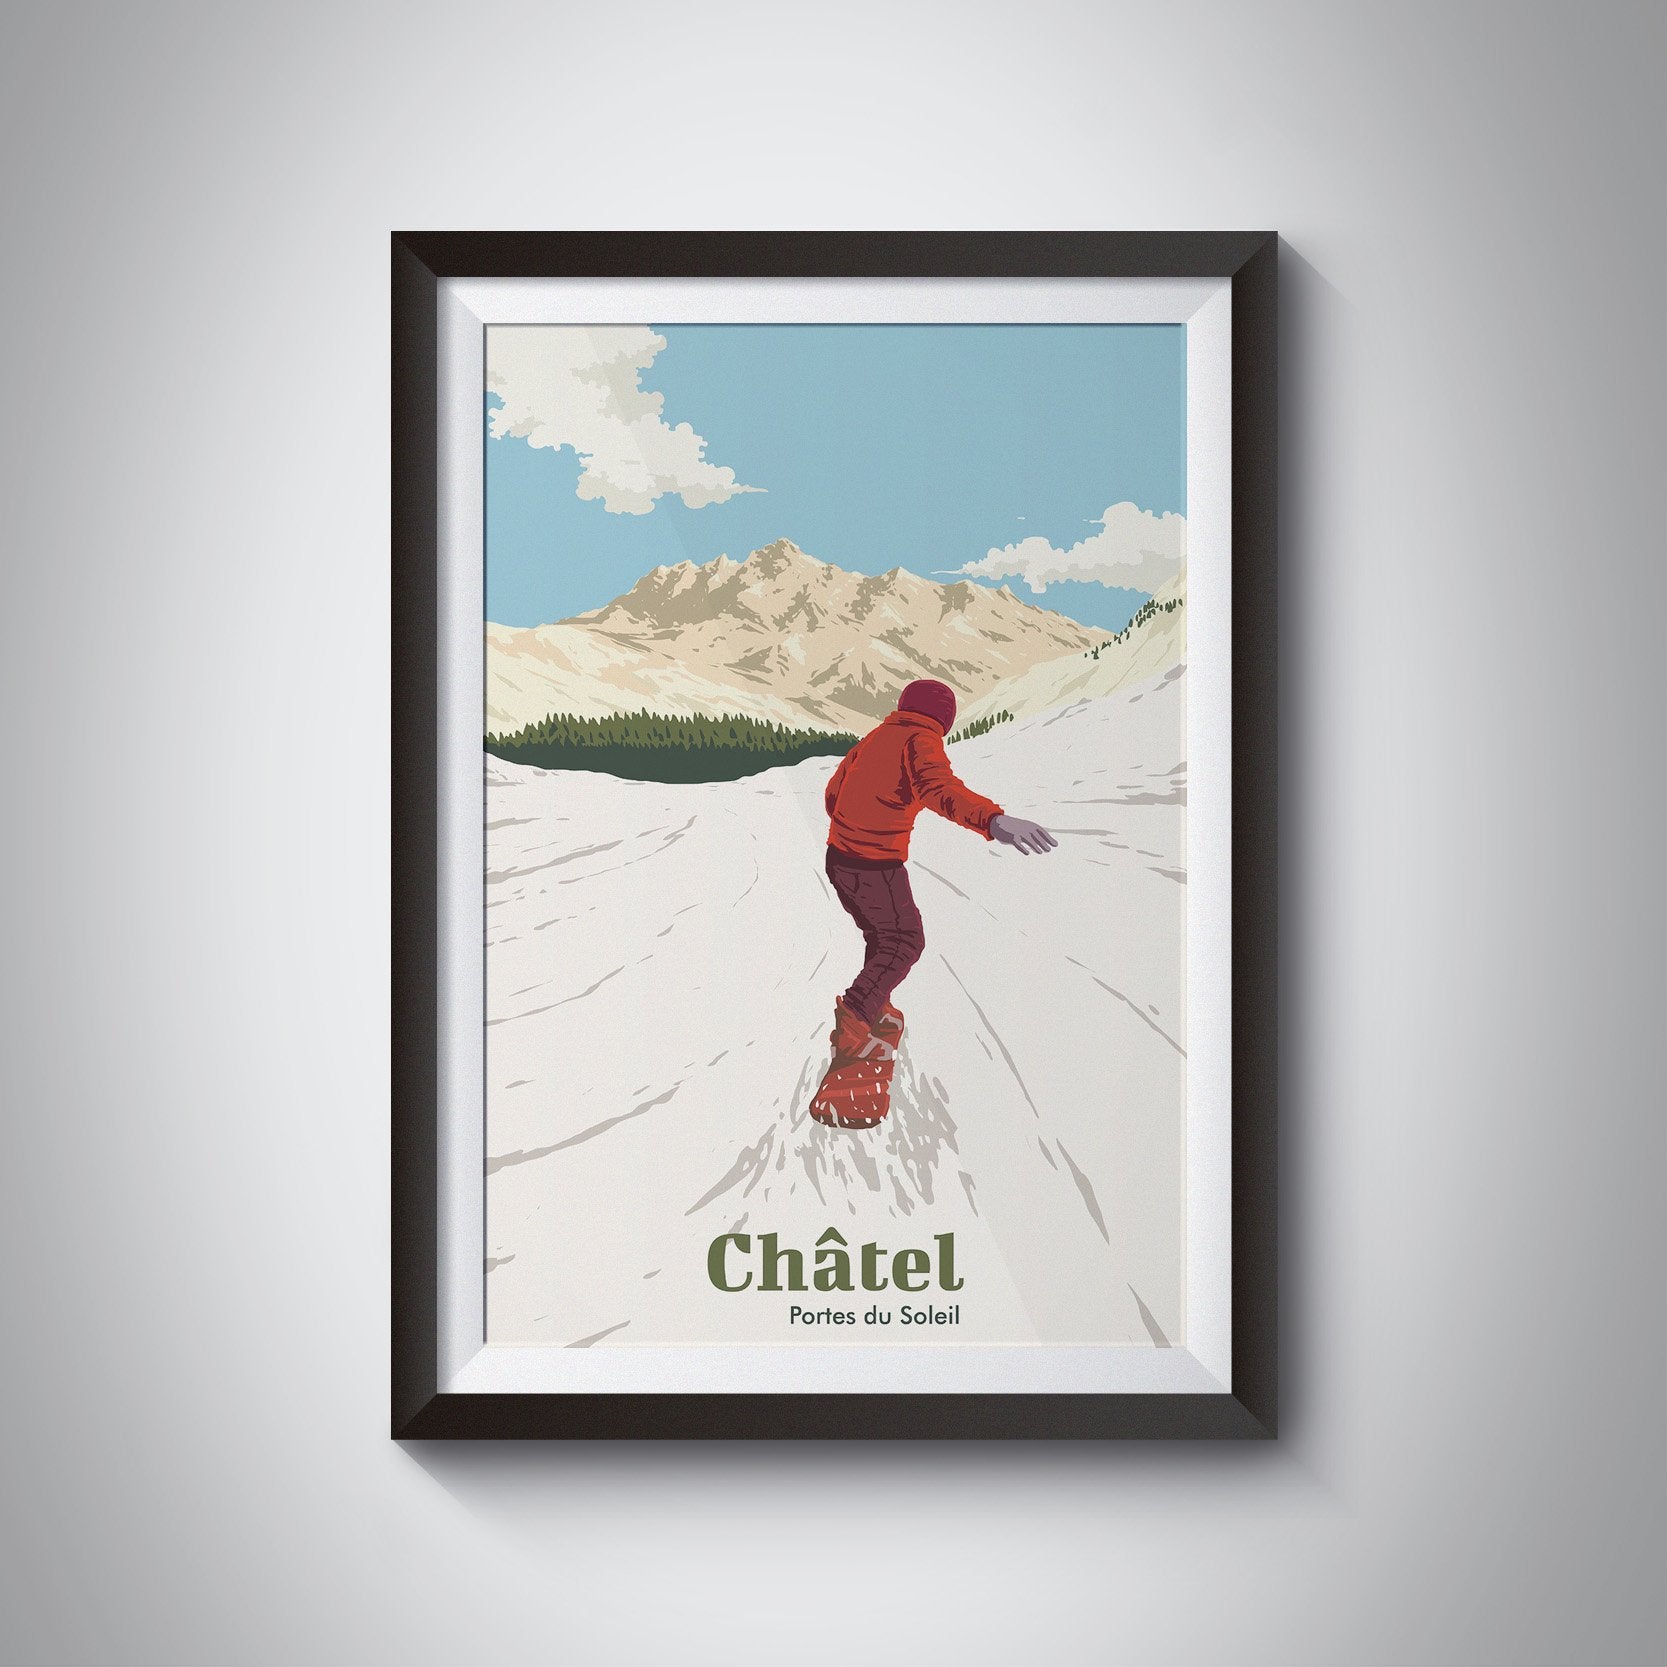 Chatel Snowboarding Travel Poster